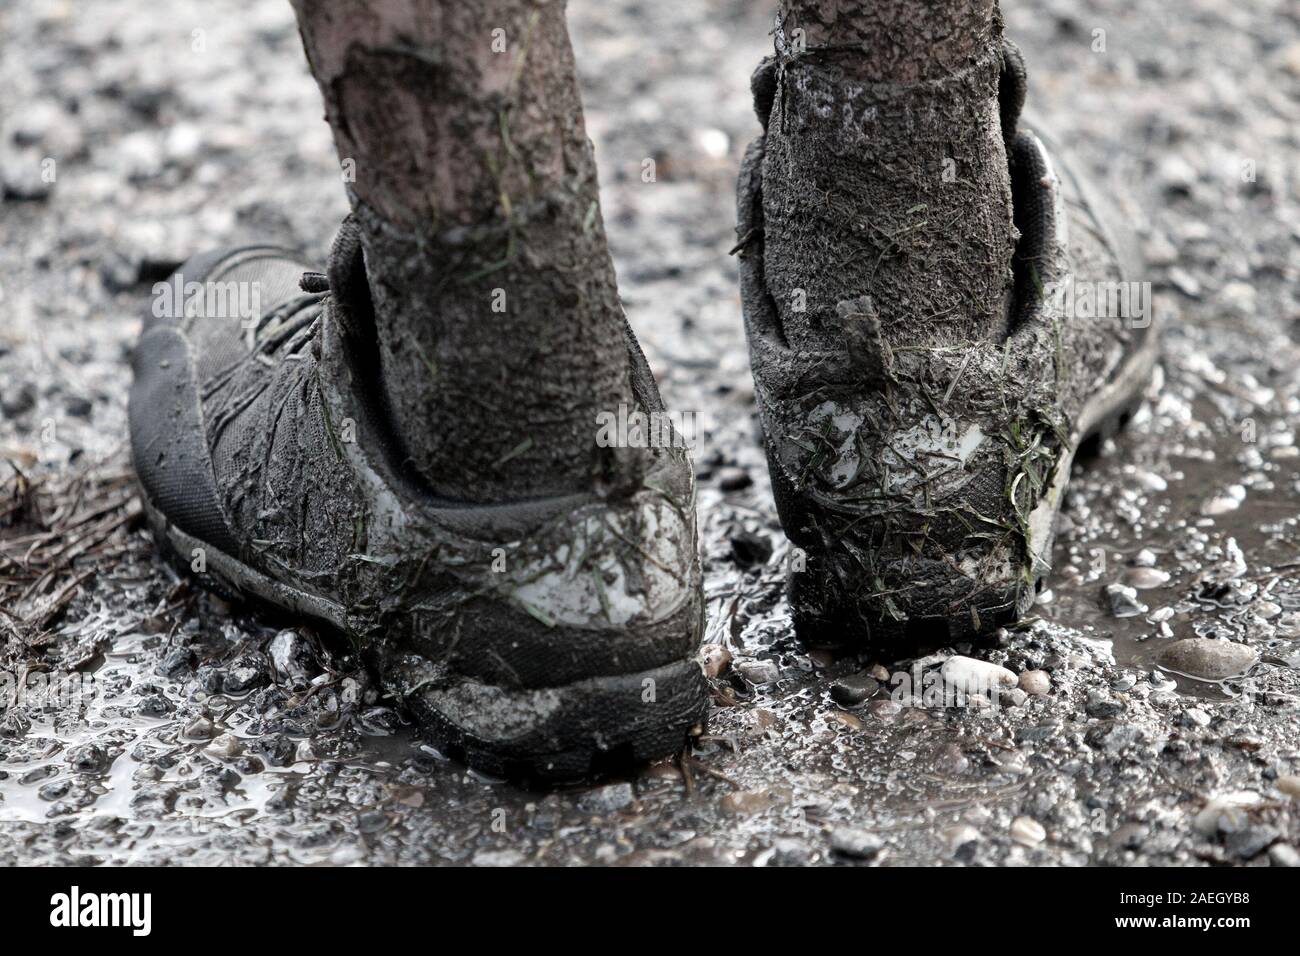 running shoes for mud